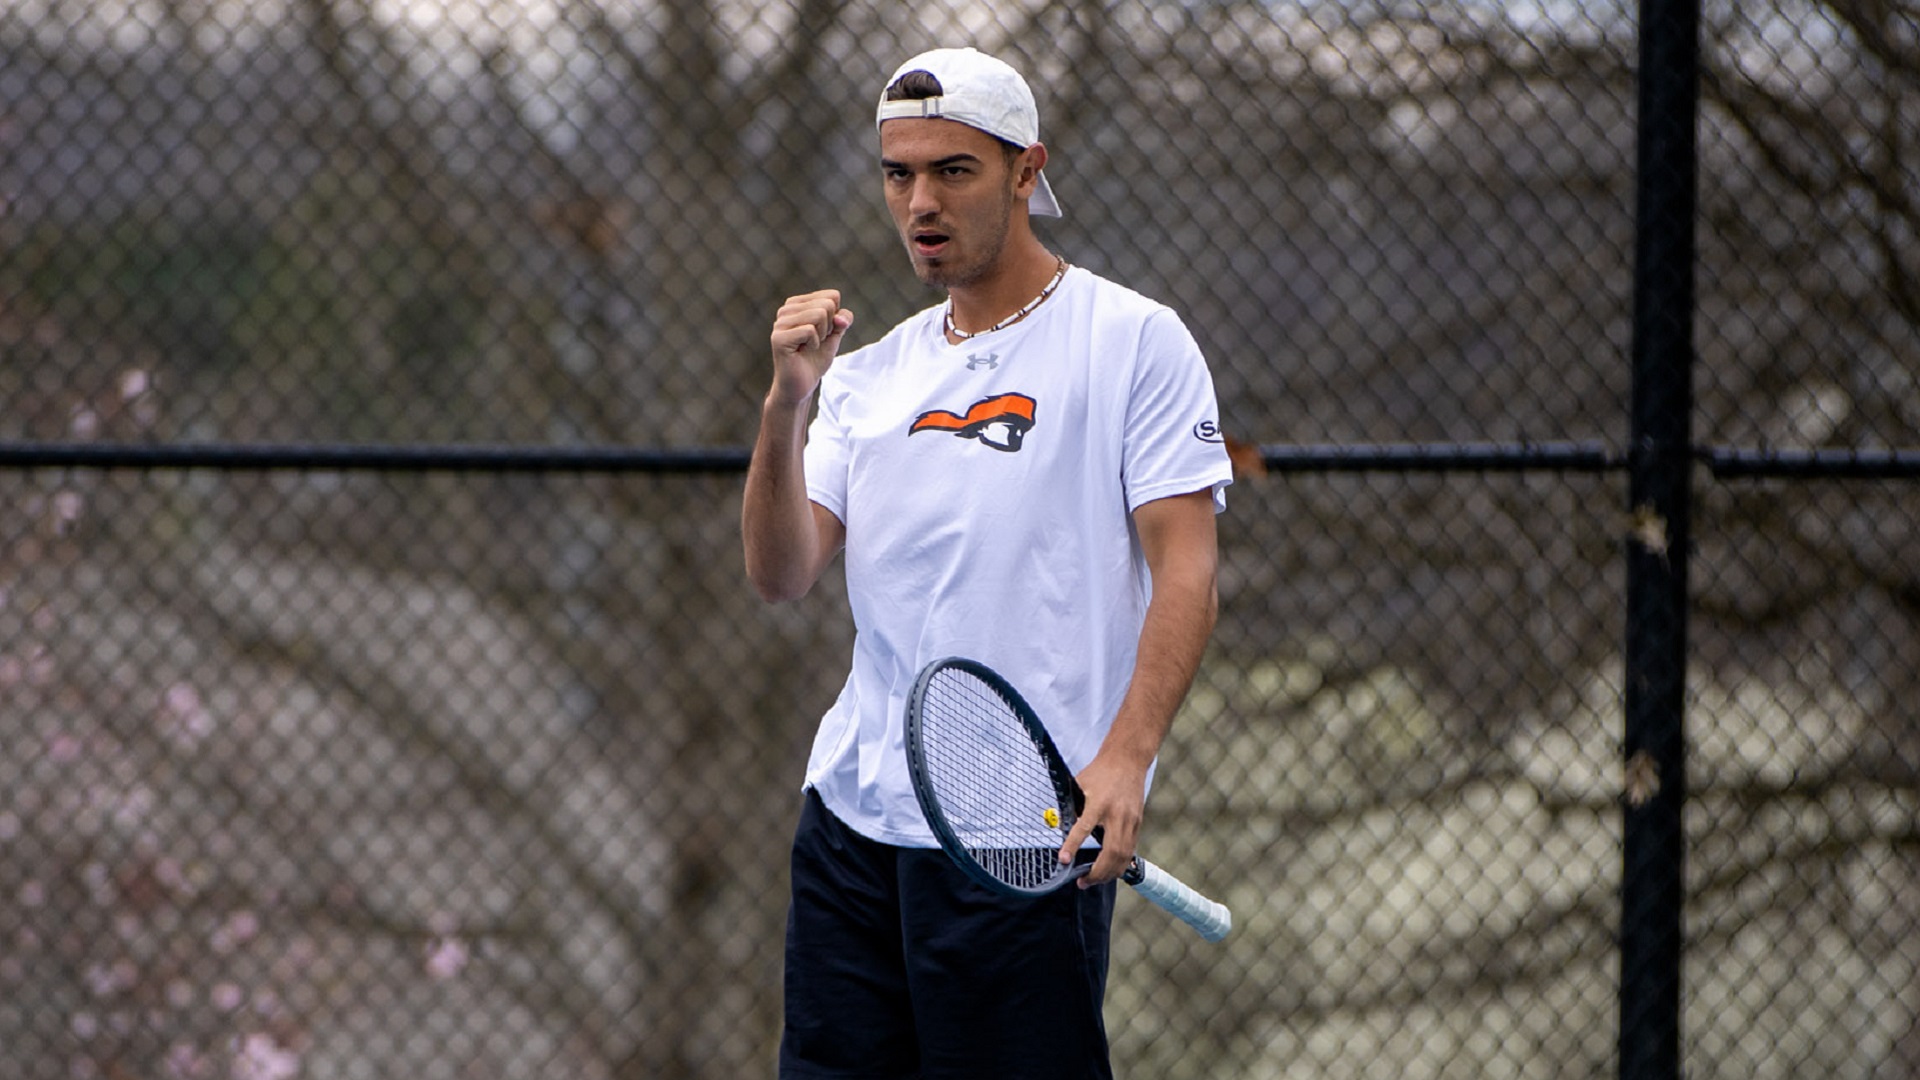 Tijn van Gorkom won in both singles and doubles for the Pioneers against Anderson (photo by Kari Ham)